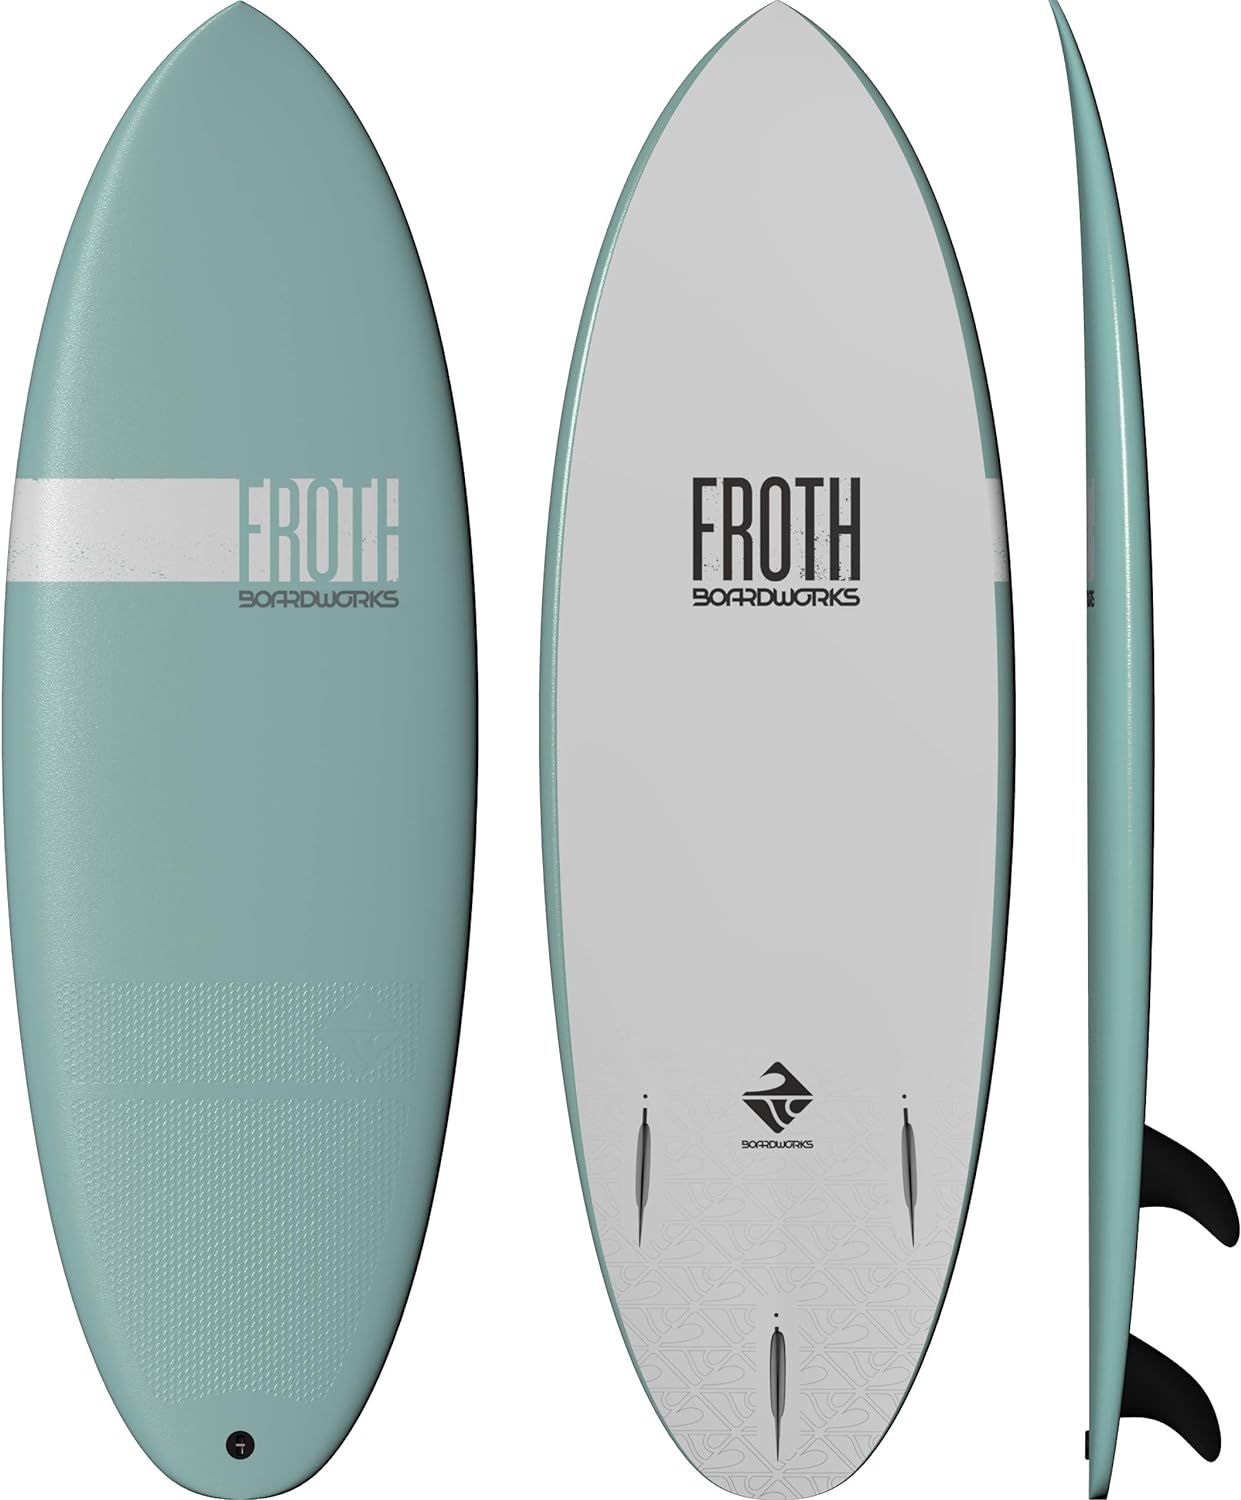 A Froth! surfboard for beginners, designed by Boardworks, that is designed for smaller waves, with the word froth on it.